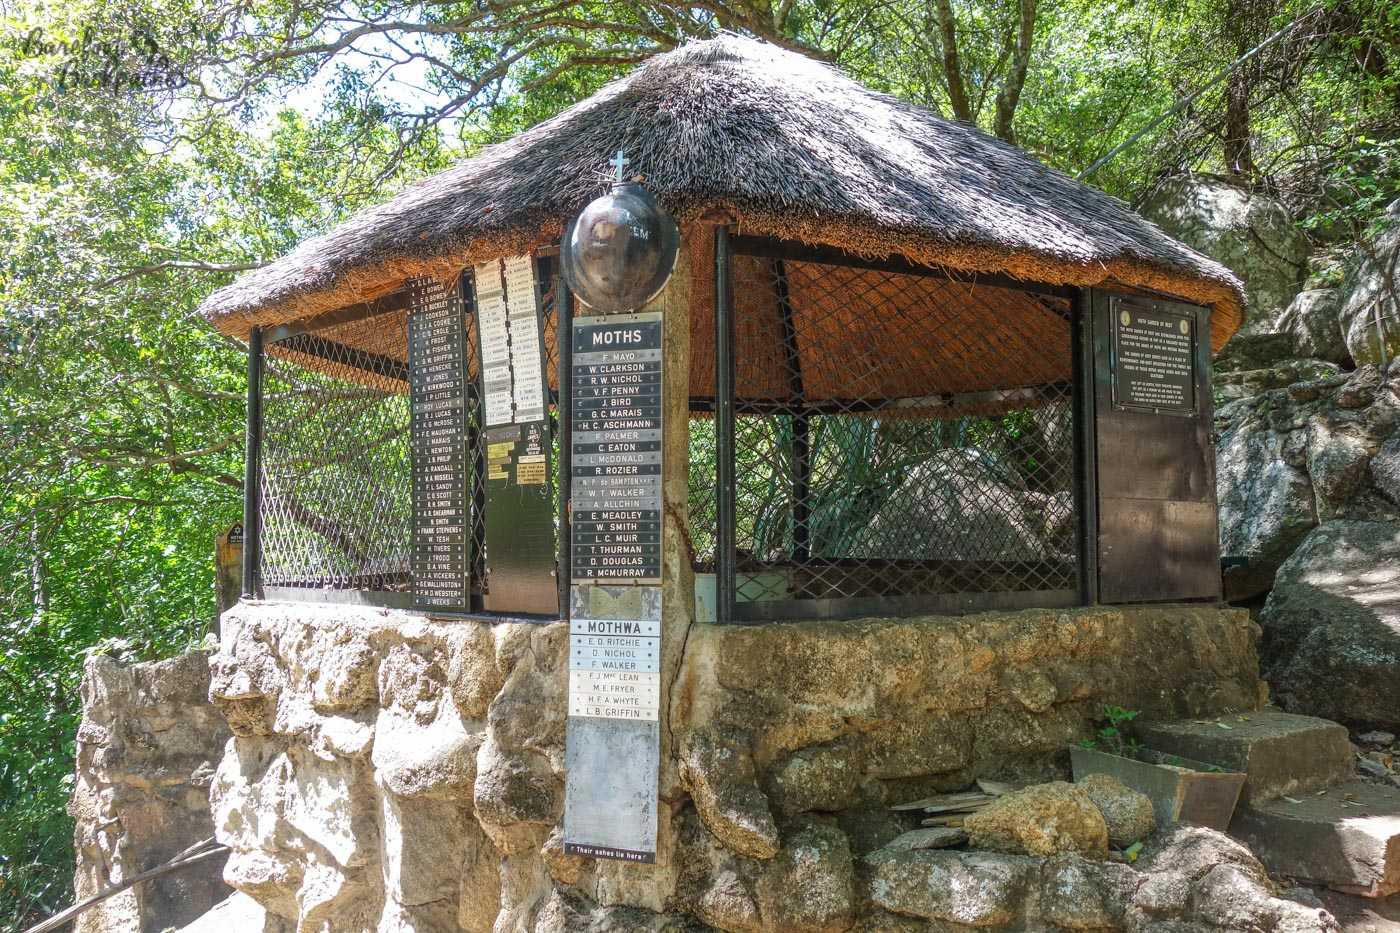 The MOTH shelter in the Matabo Hills, complete with dedication to the fallen.